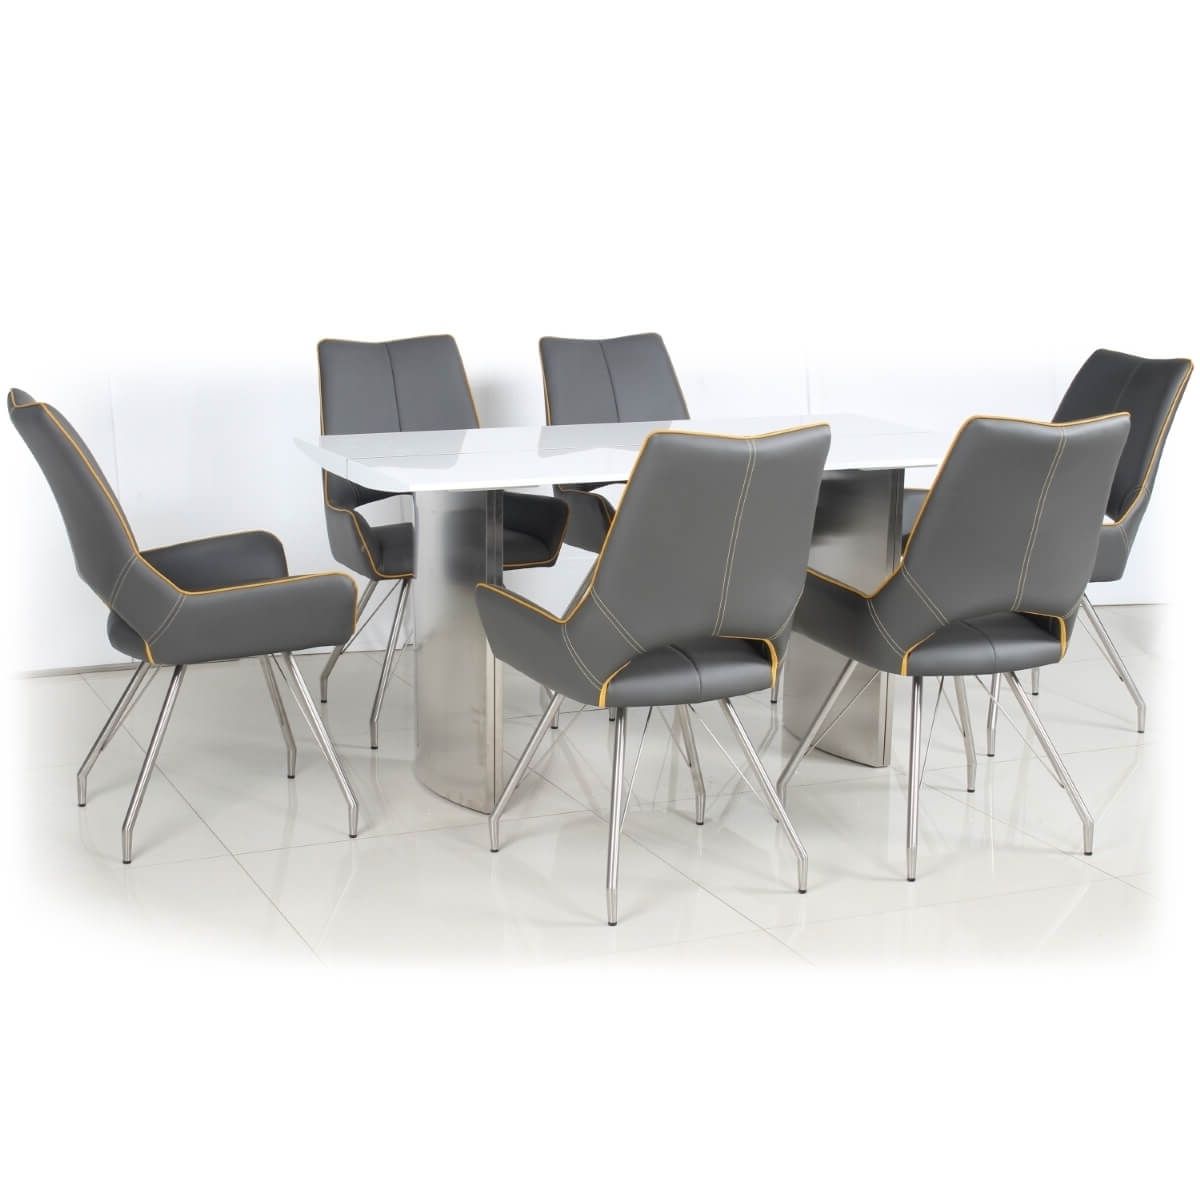 White Gloss Dining Tables Intended For Widely Used Dining Set – White High Gloss Dining Table And 6 Grey Dining Chairs (View 22 of 25)